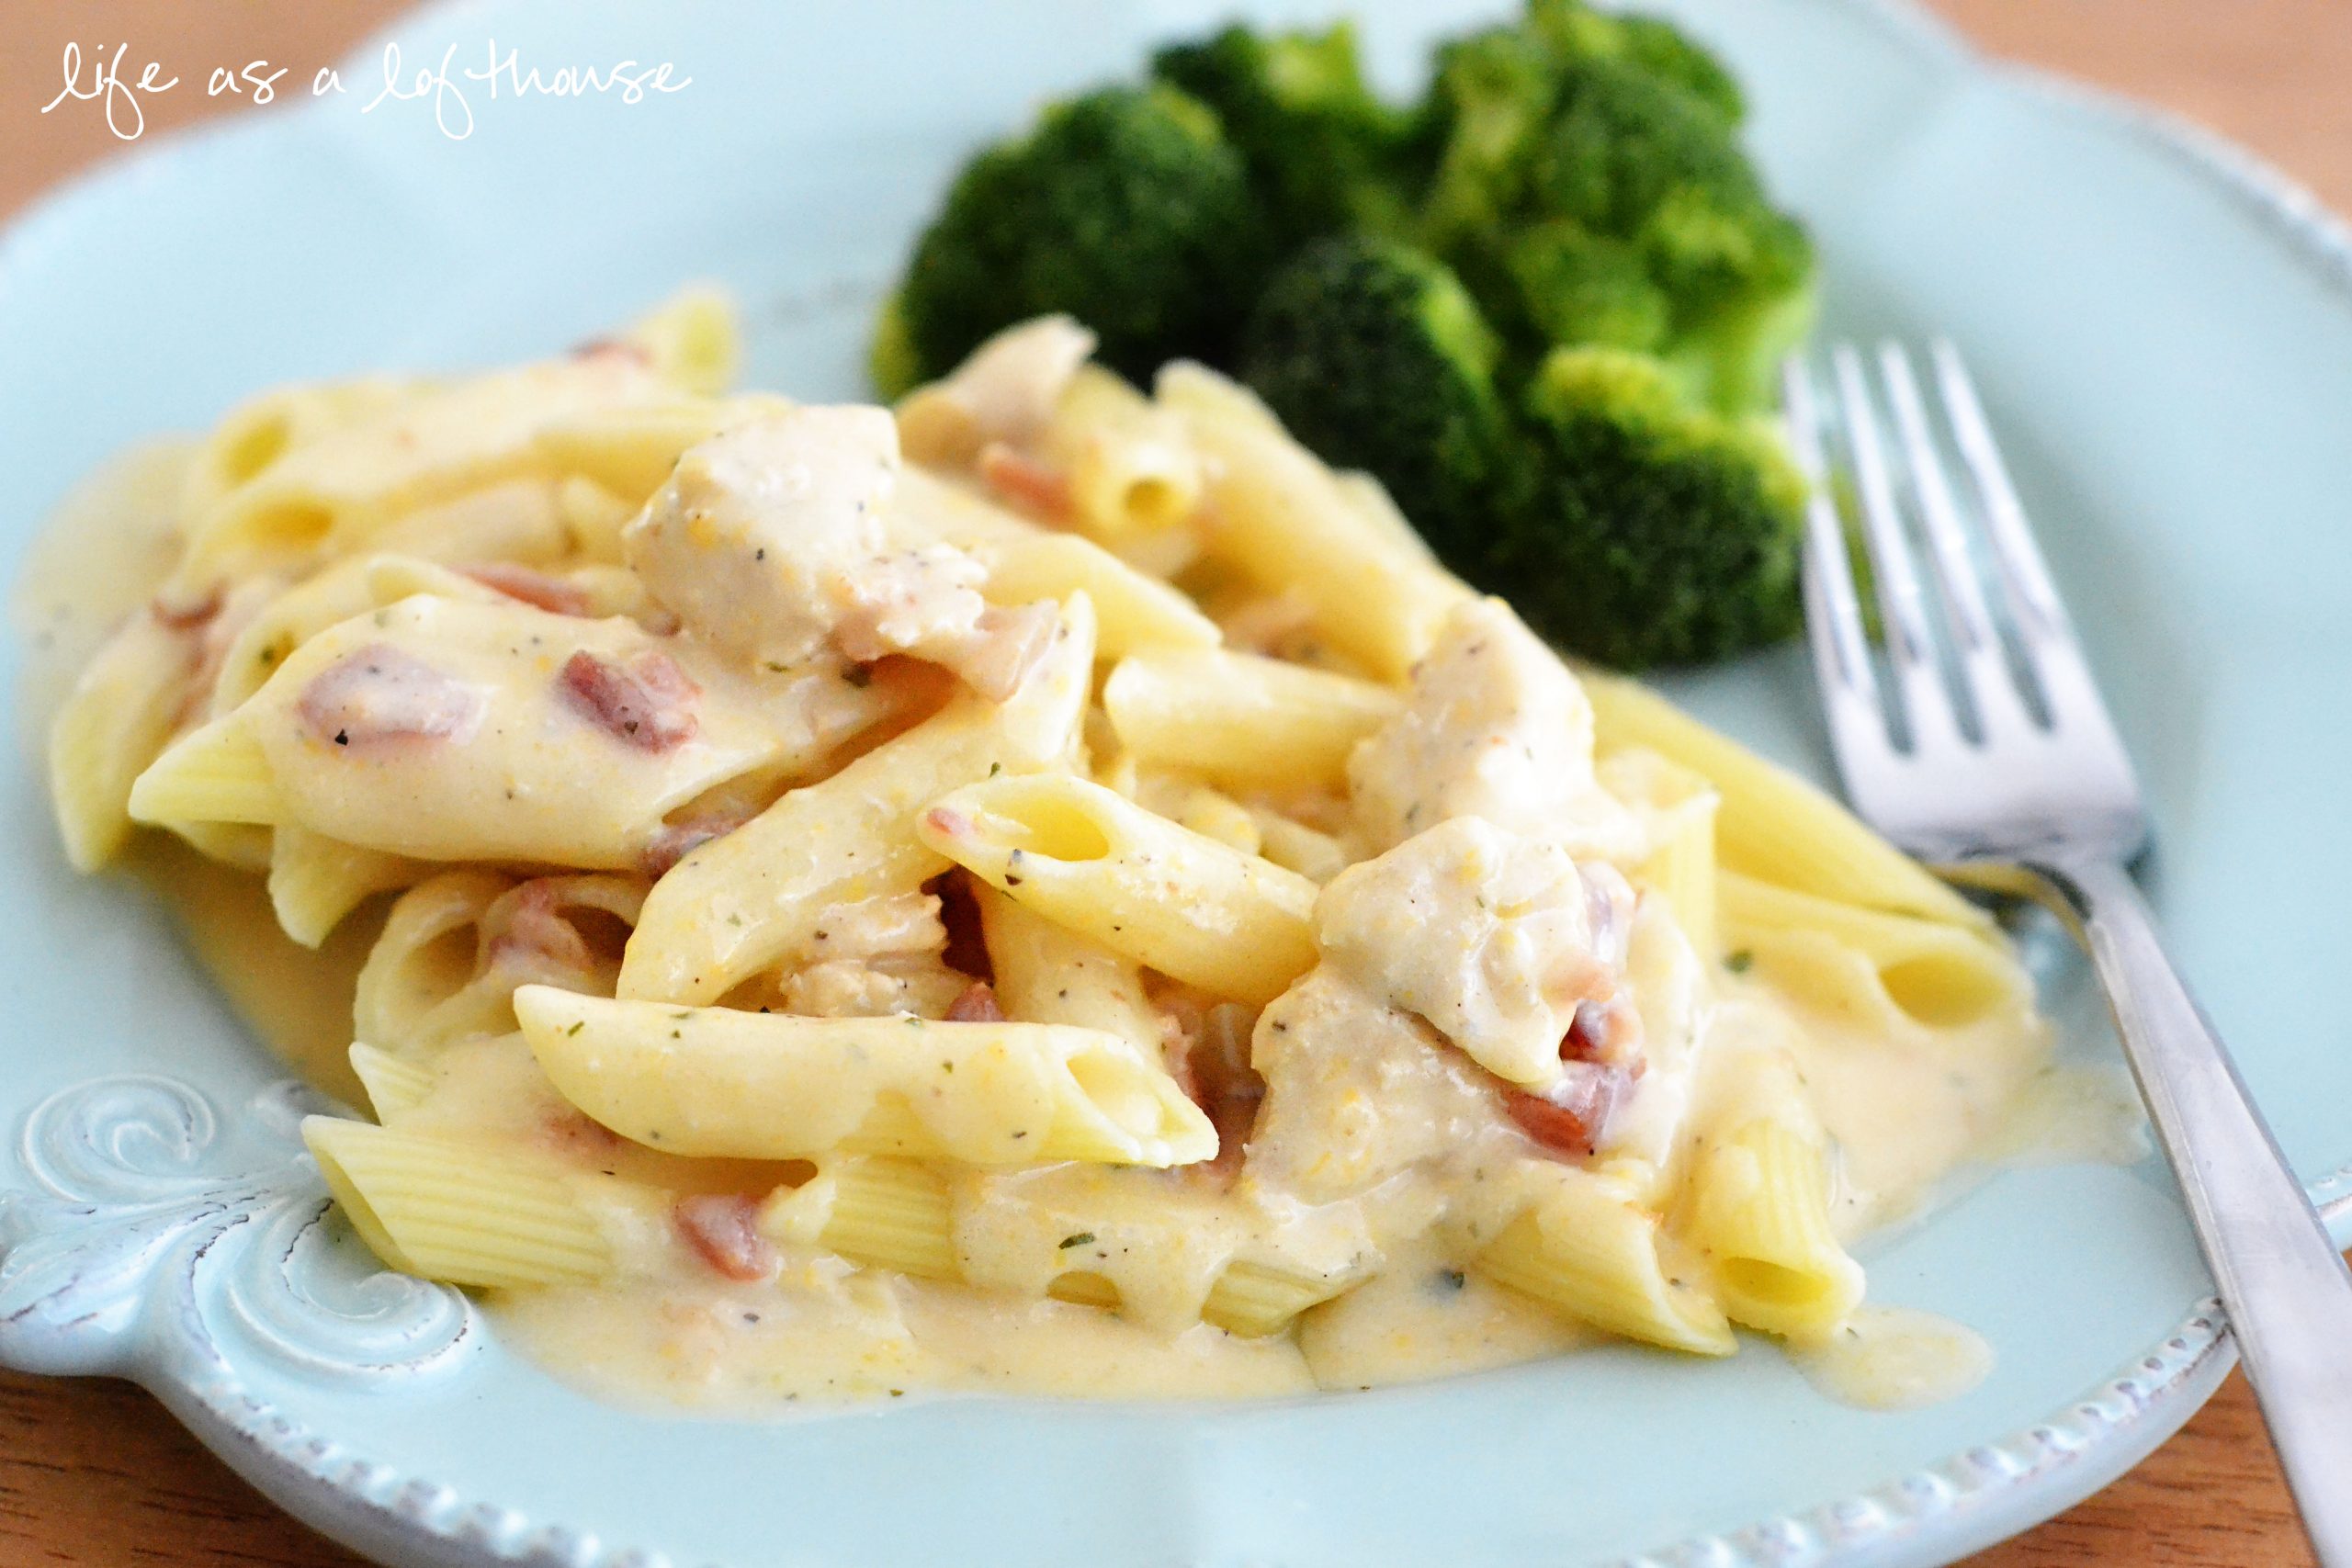 Cheesy Ranch Chicken Pasta is pasta covered in a creamy cheese, chicken and bacon sauce. Life-in-the-Lofthouse.com